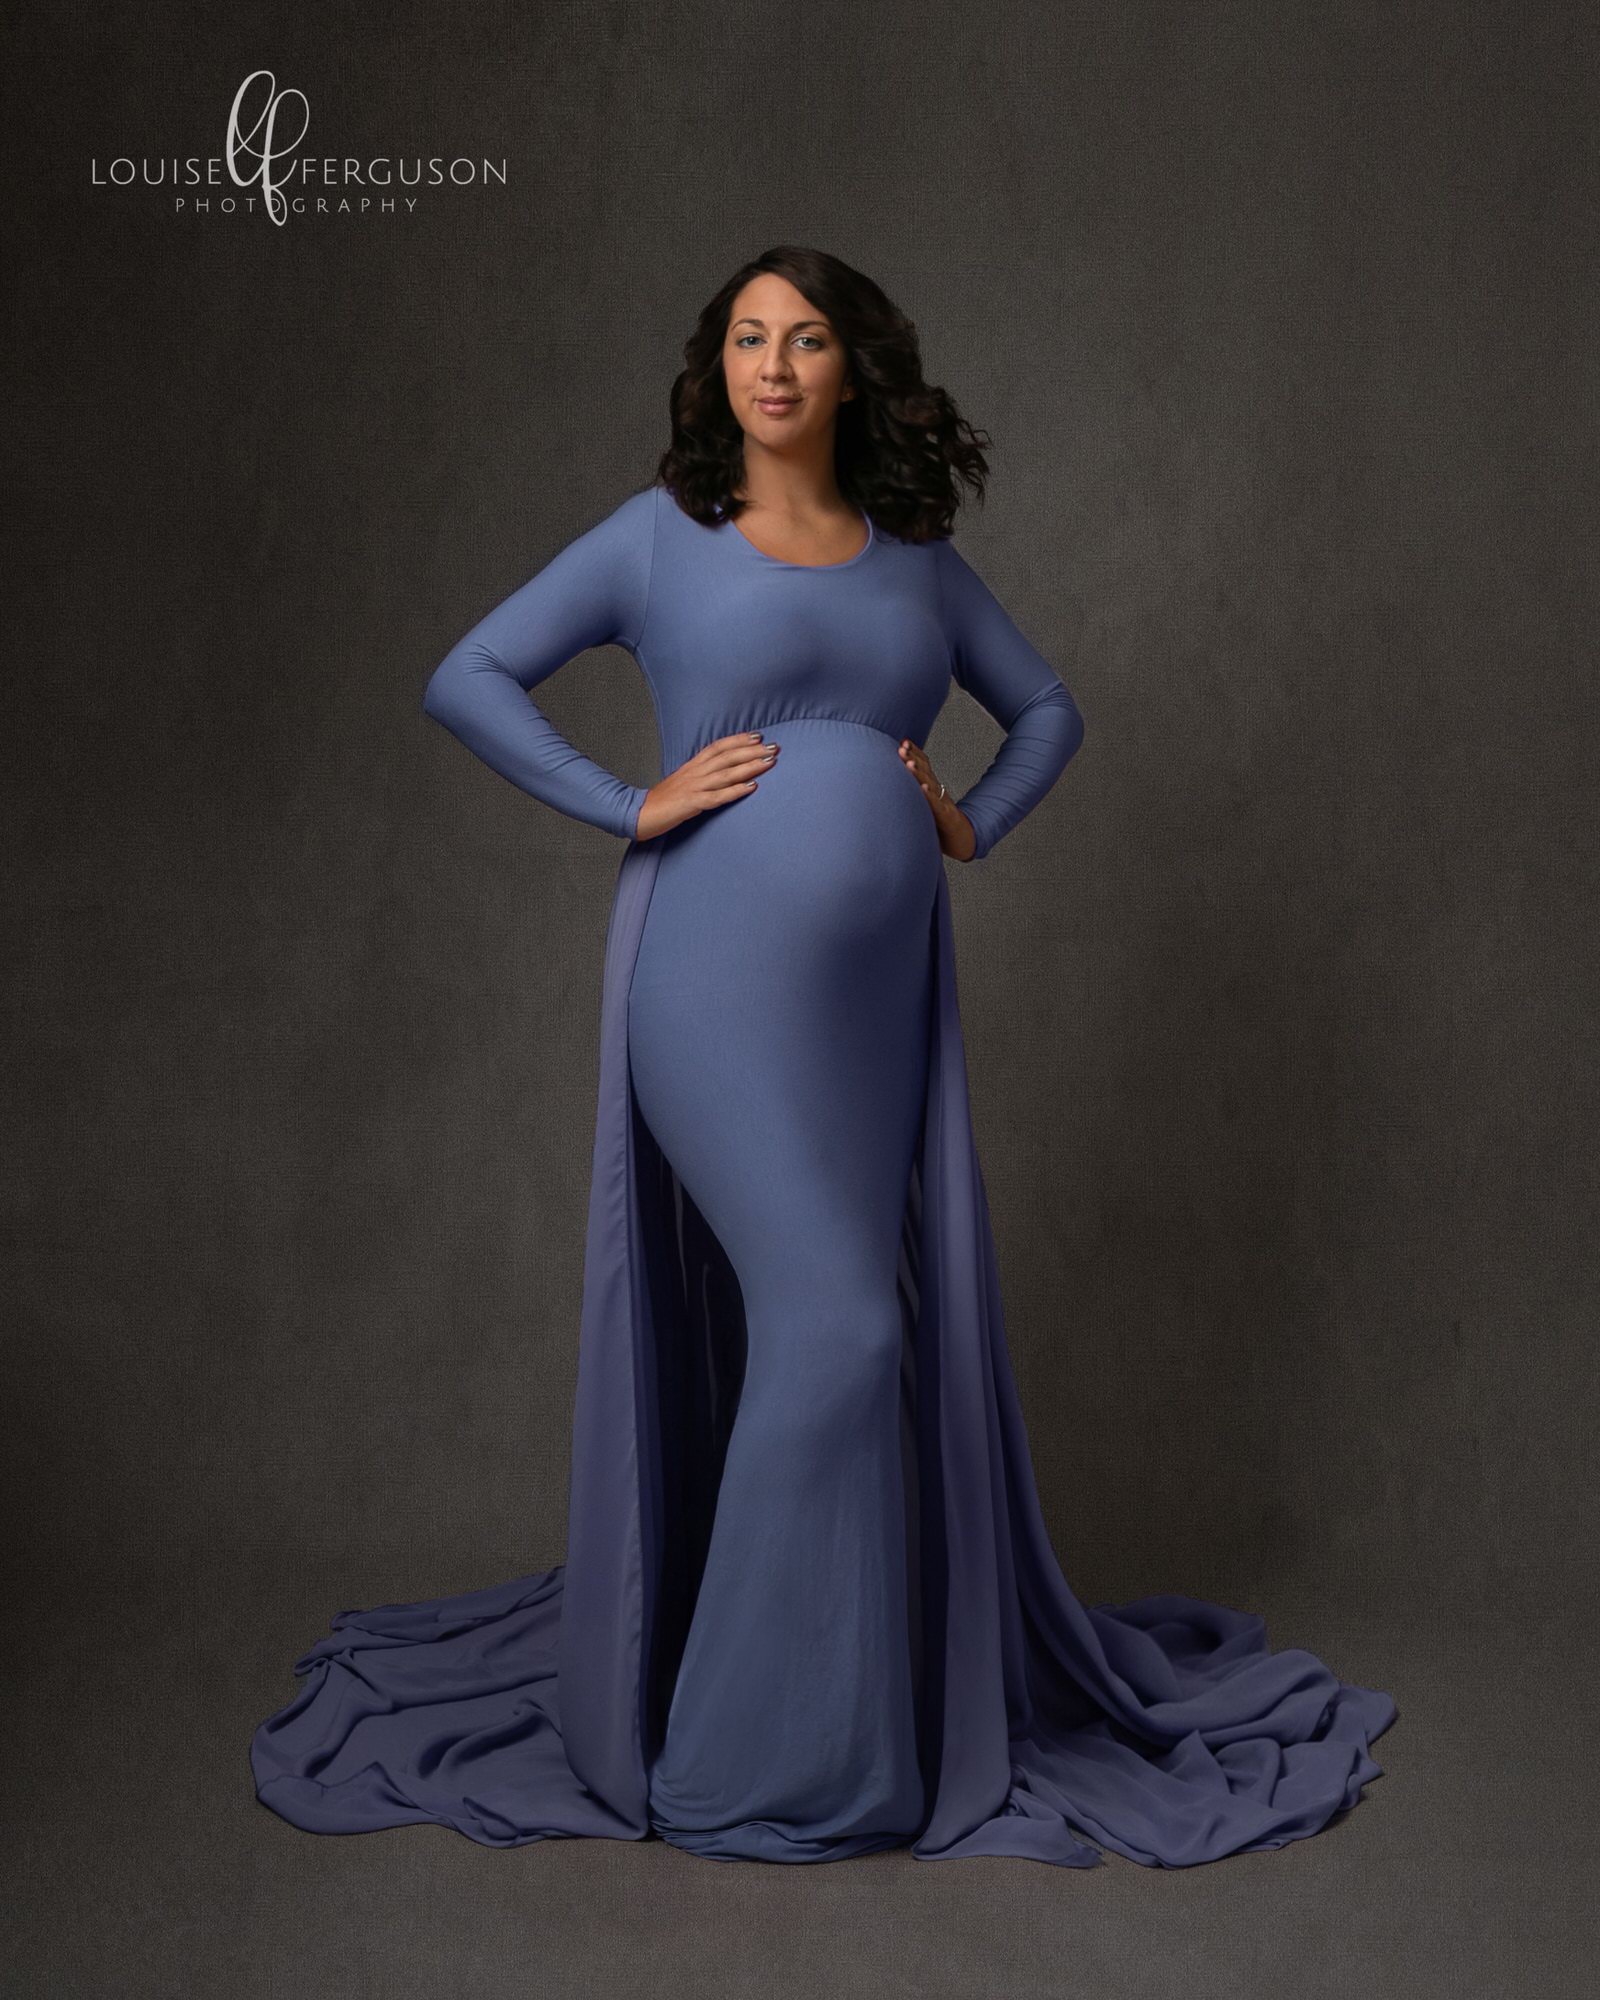 Pregnant female with long dark hair, wearing a violet blue gown, facing forward with her hand on her hips. Full length image taken on a grey backdrop by Glasgow Maternity Photographer